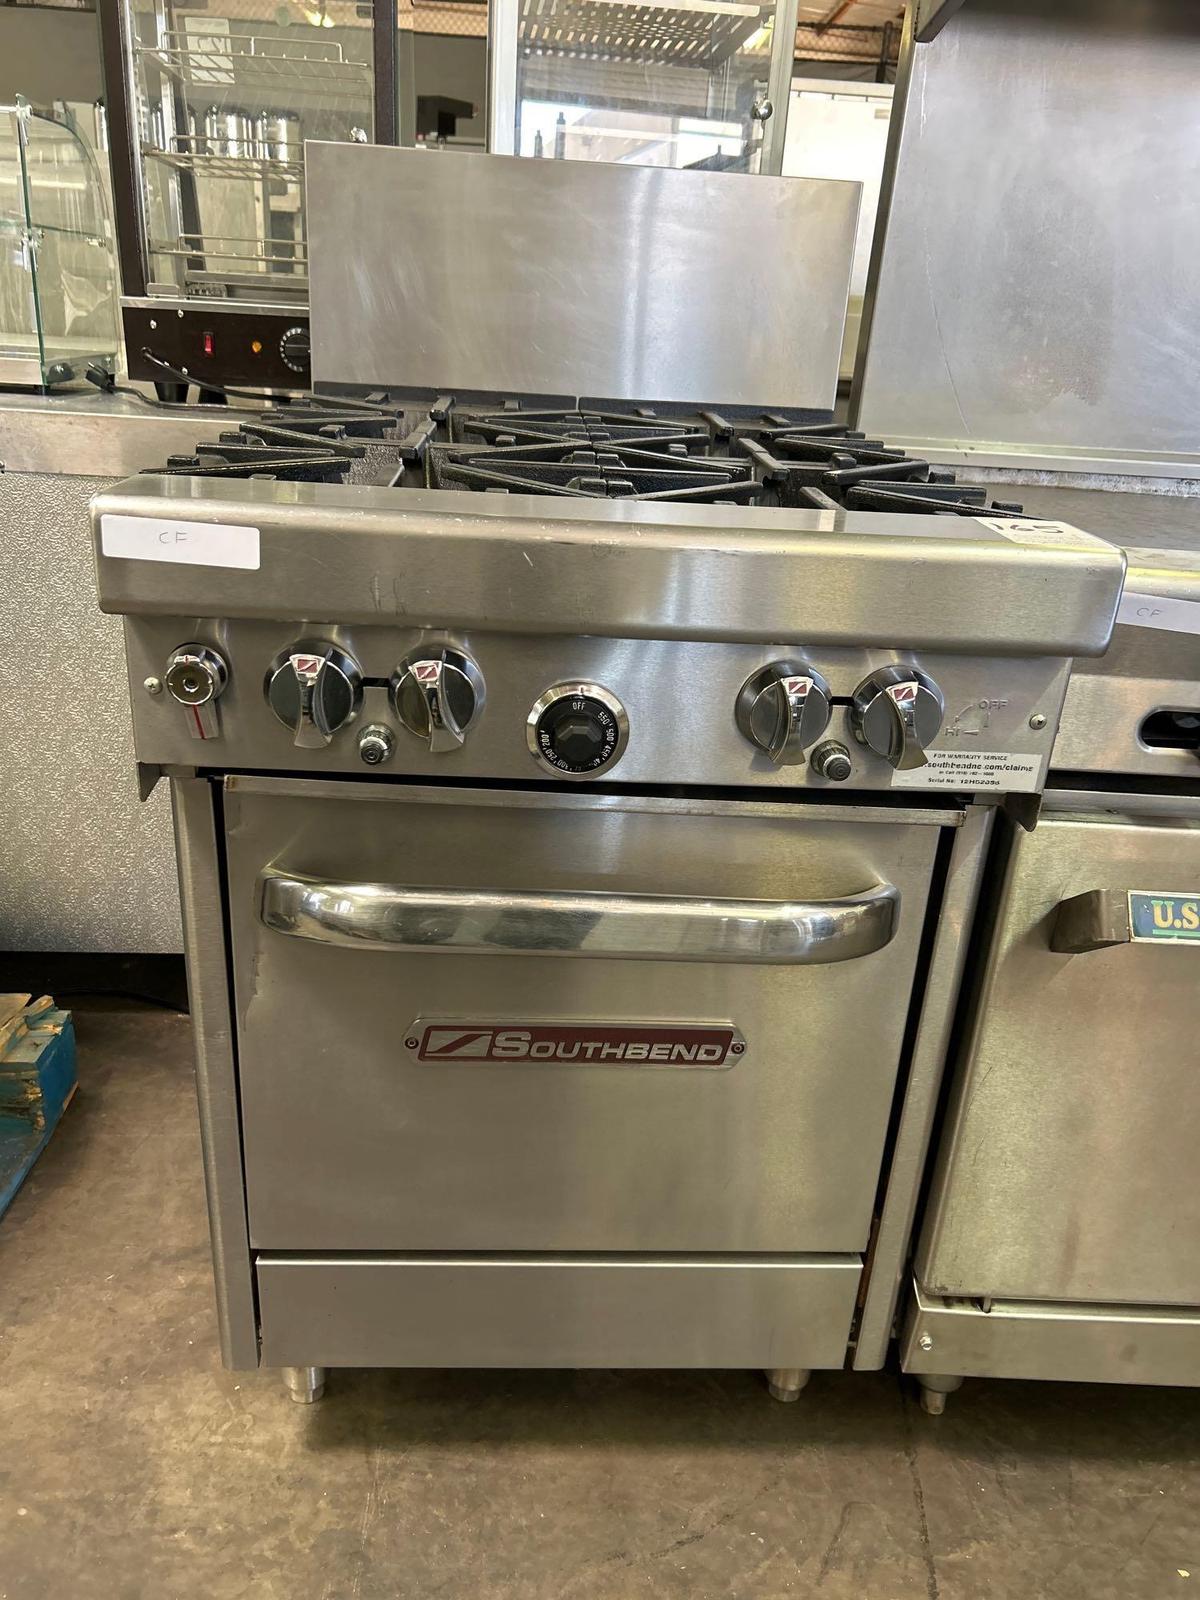 Southbend 24 in. 4 Open Burner Gas Range and Oven